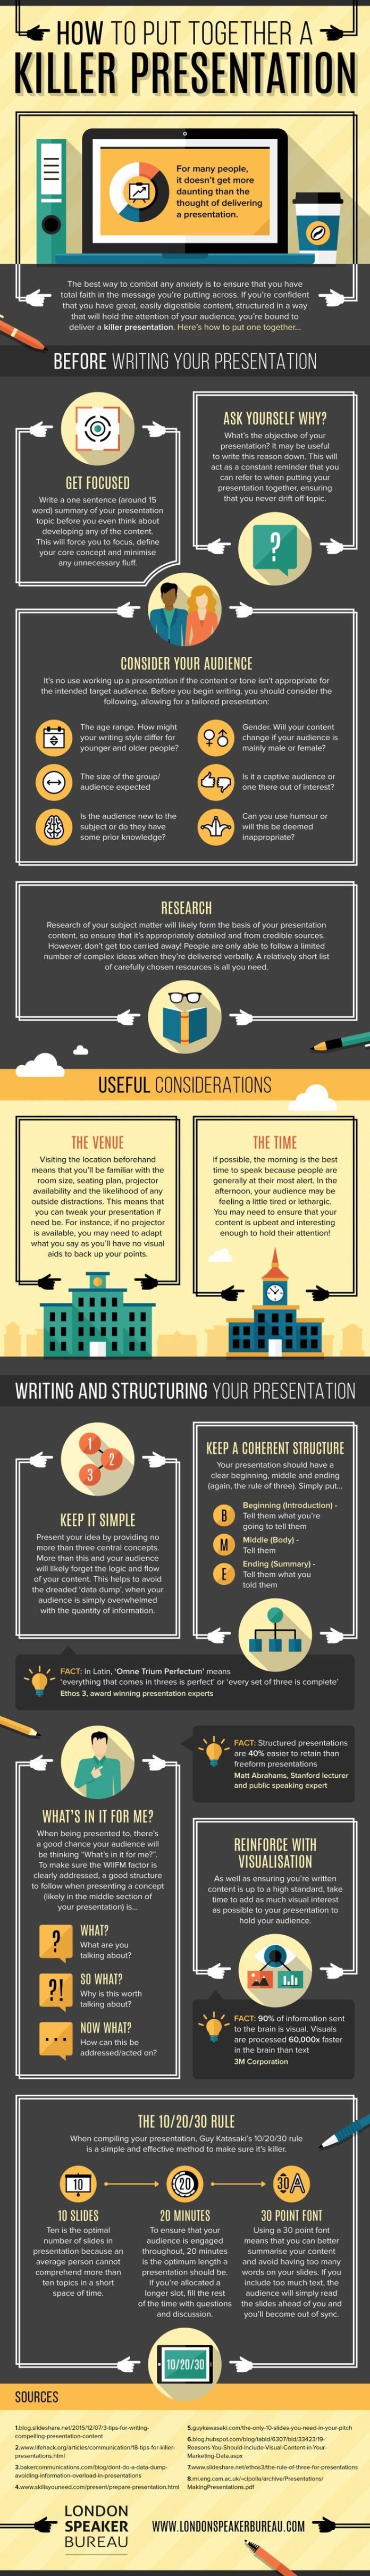 how to put a presentation together